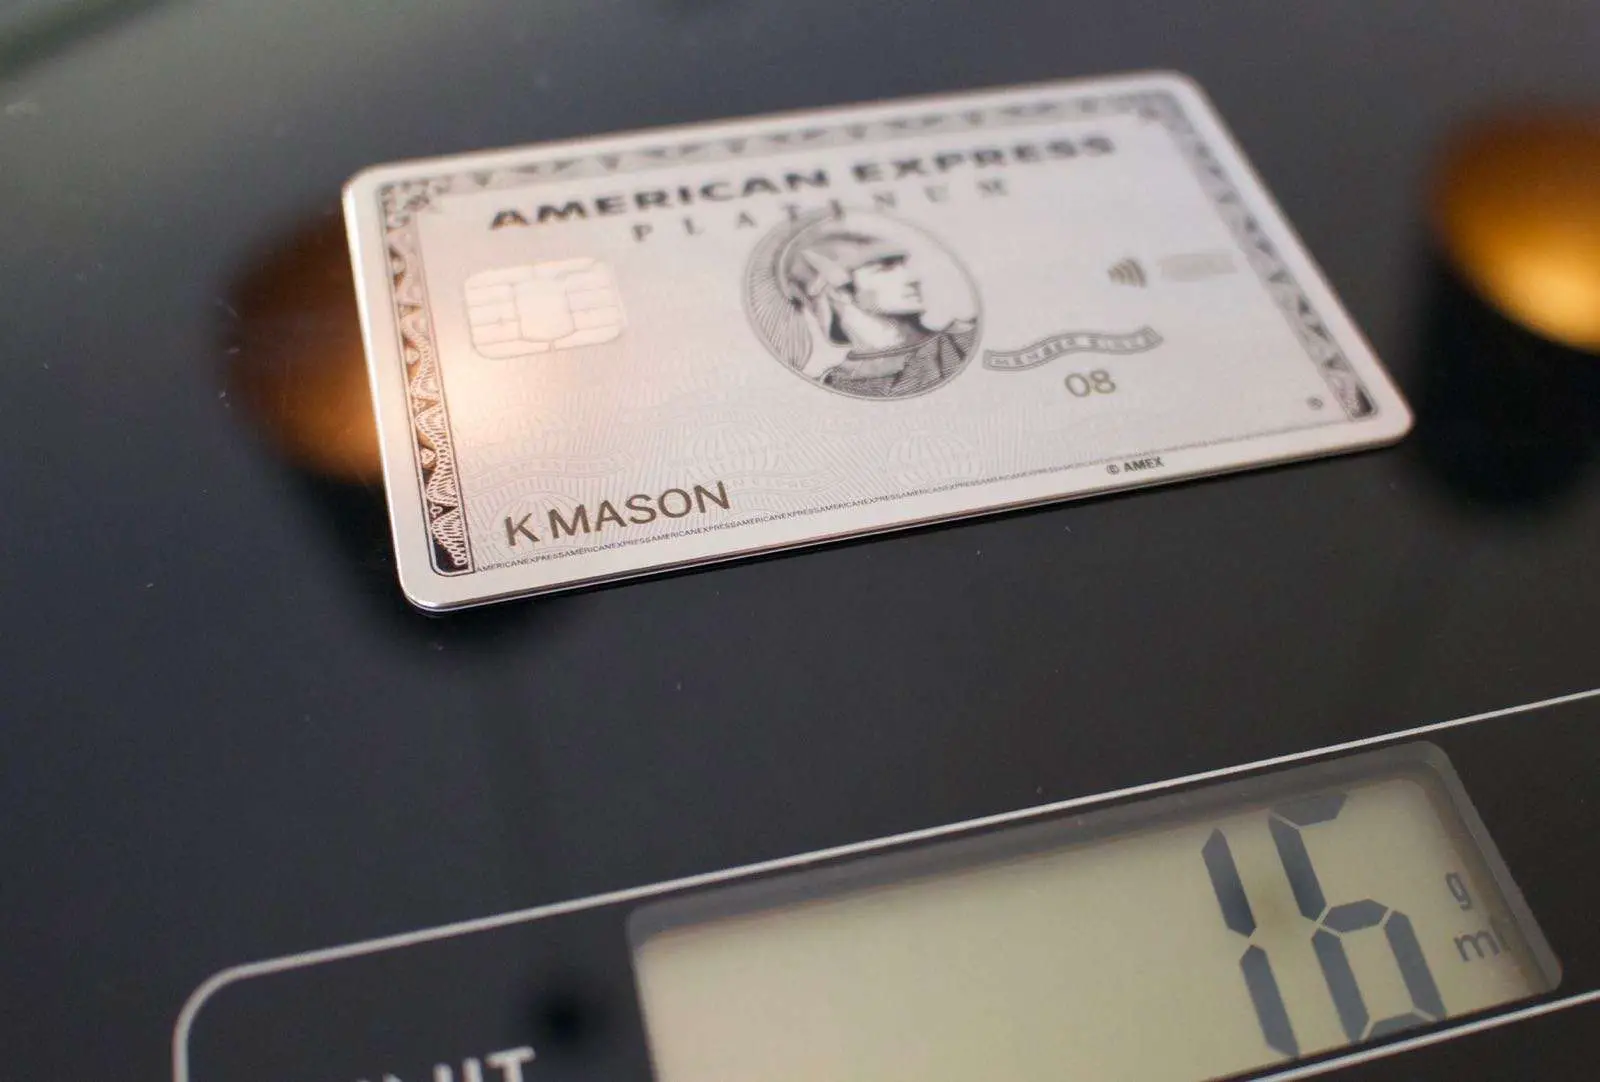 A look at the American Express Platinum metal card